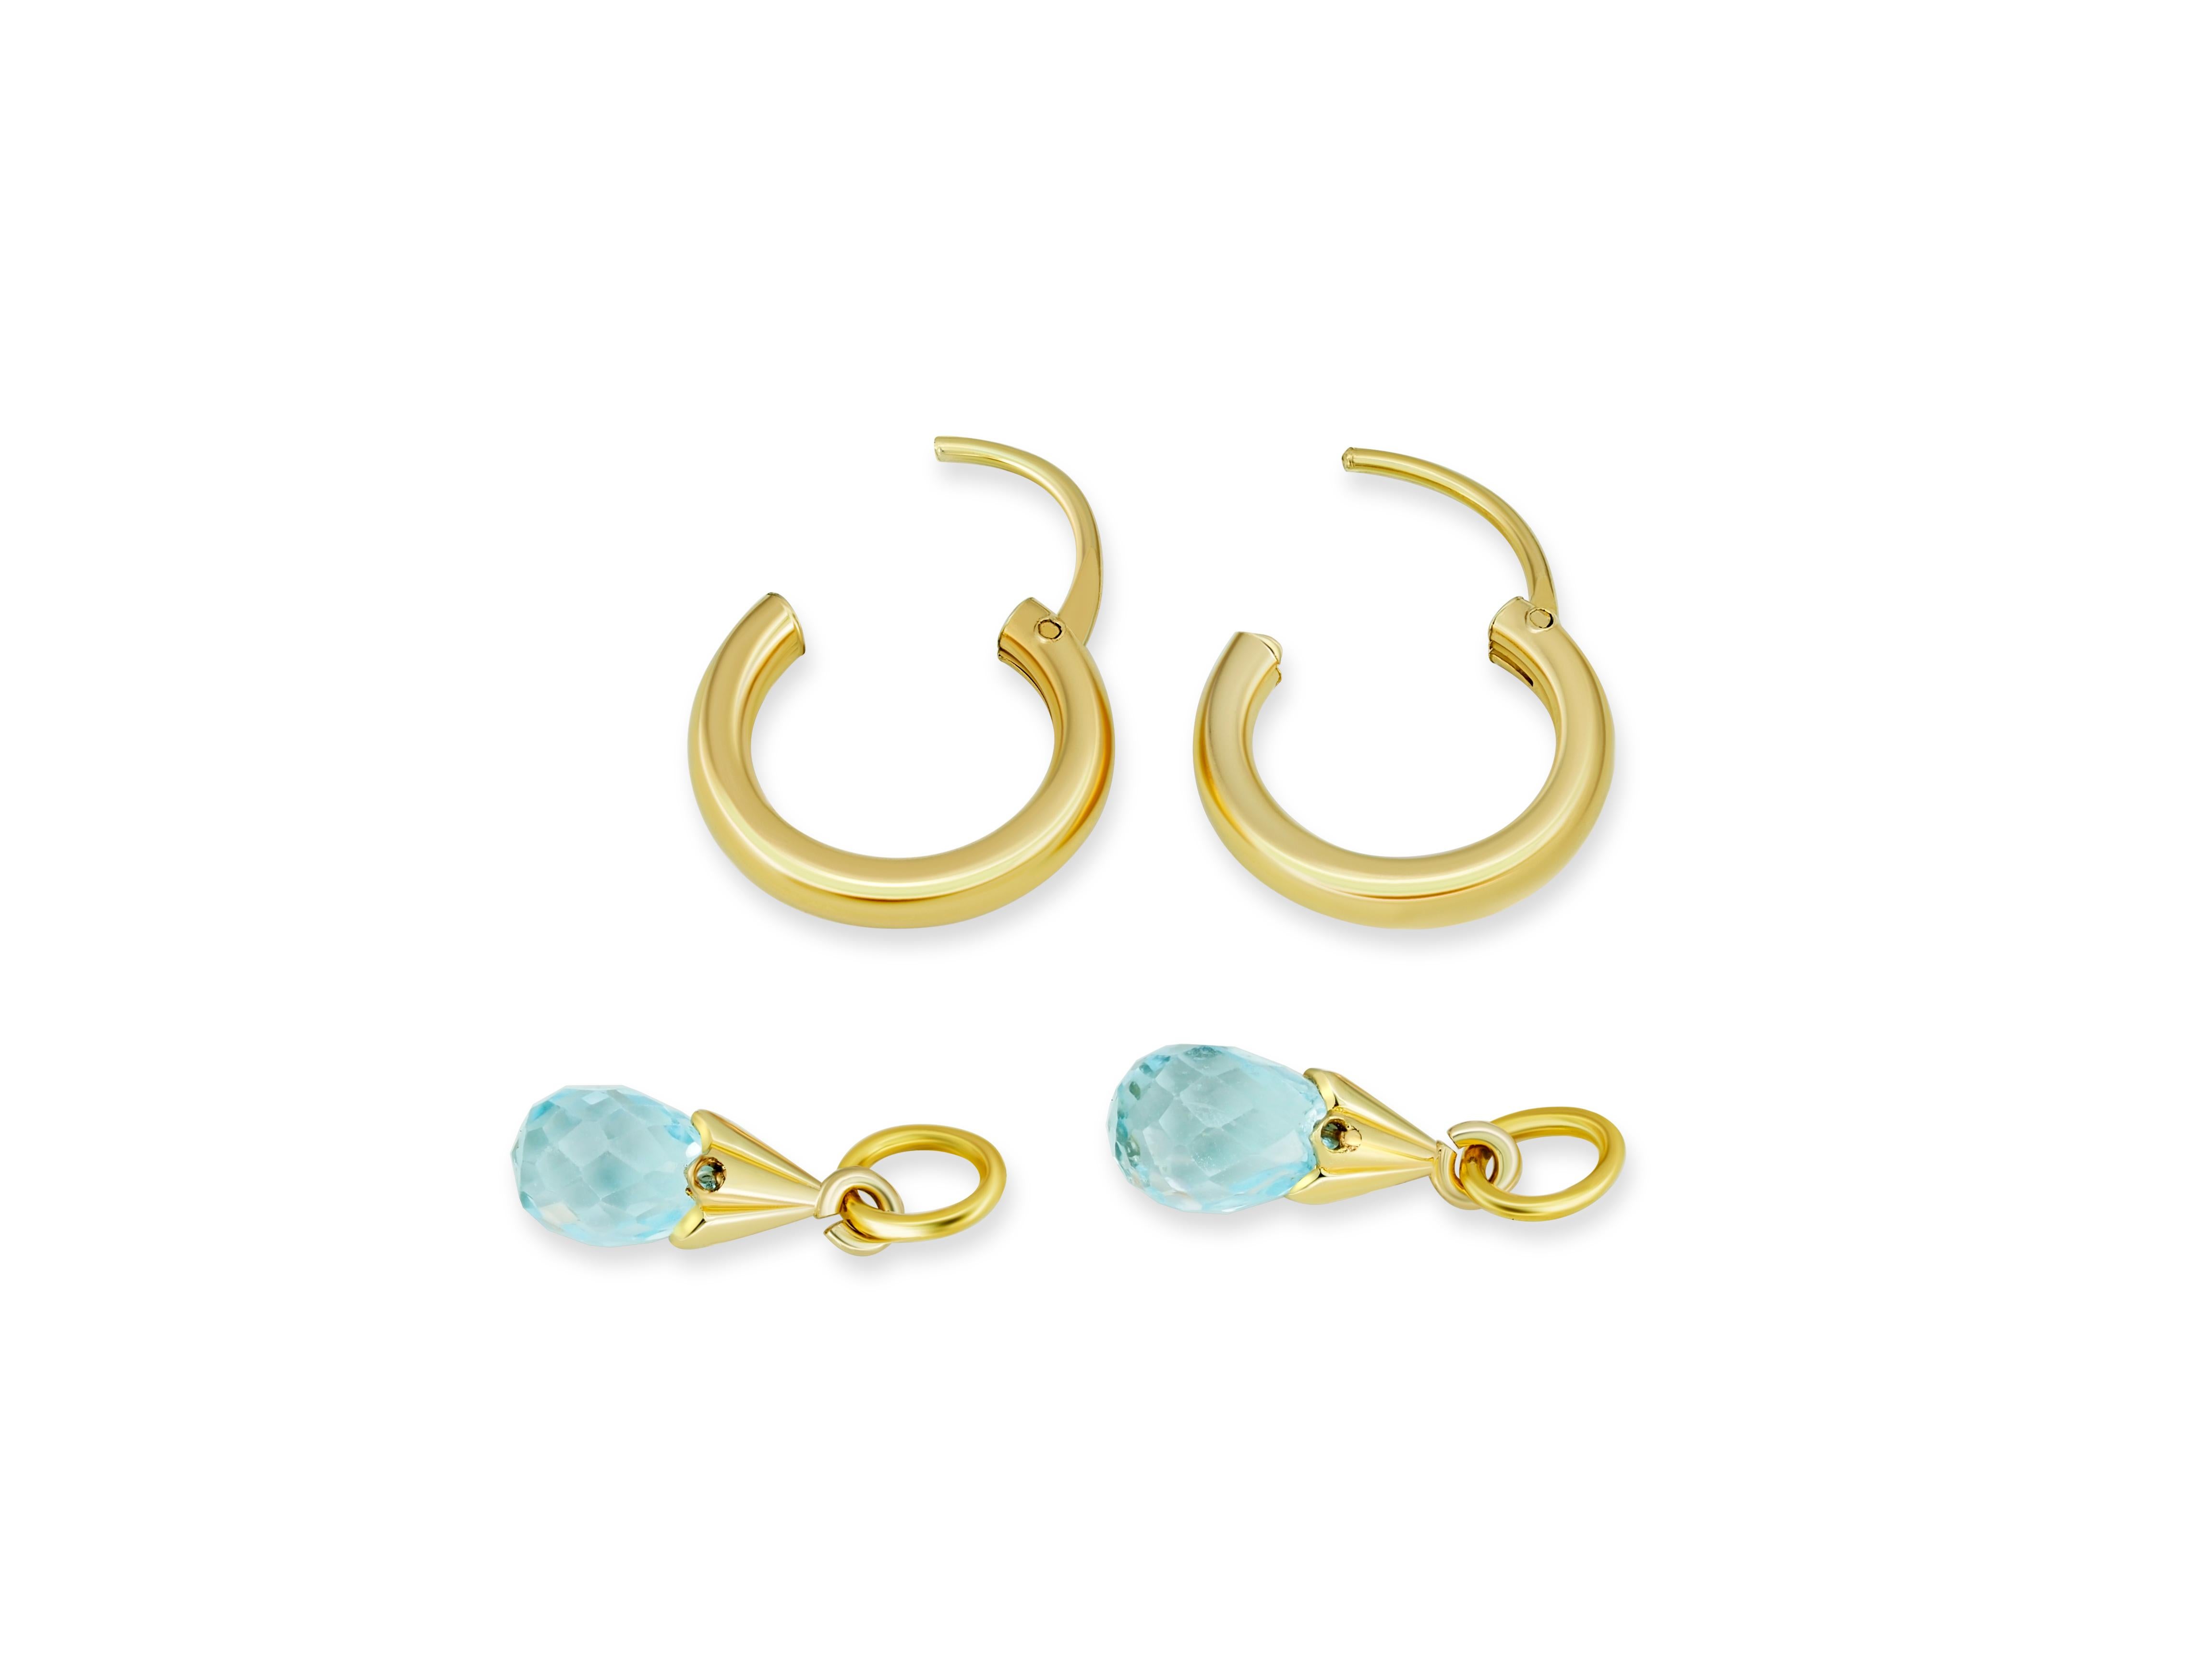 Briolette Cut Hoop Earrings and Topazs Briolette Charms in 14k Gold For Sale